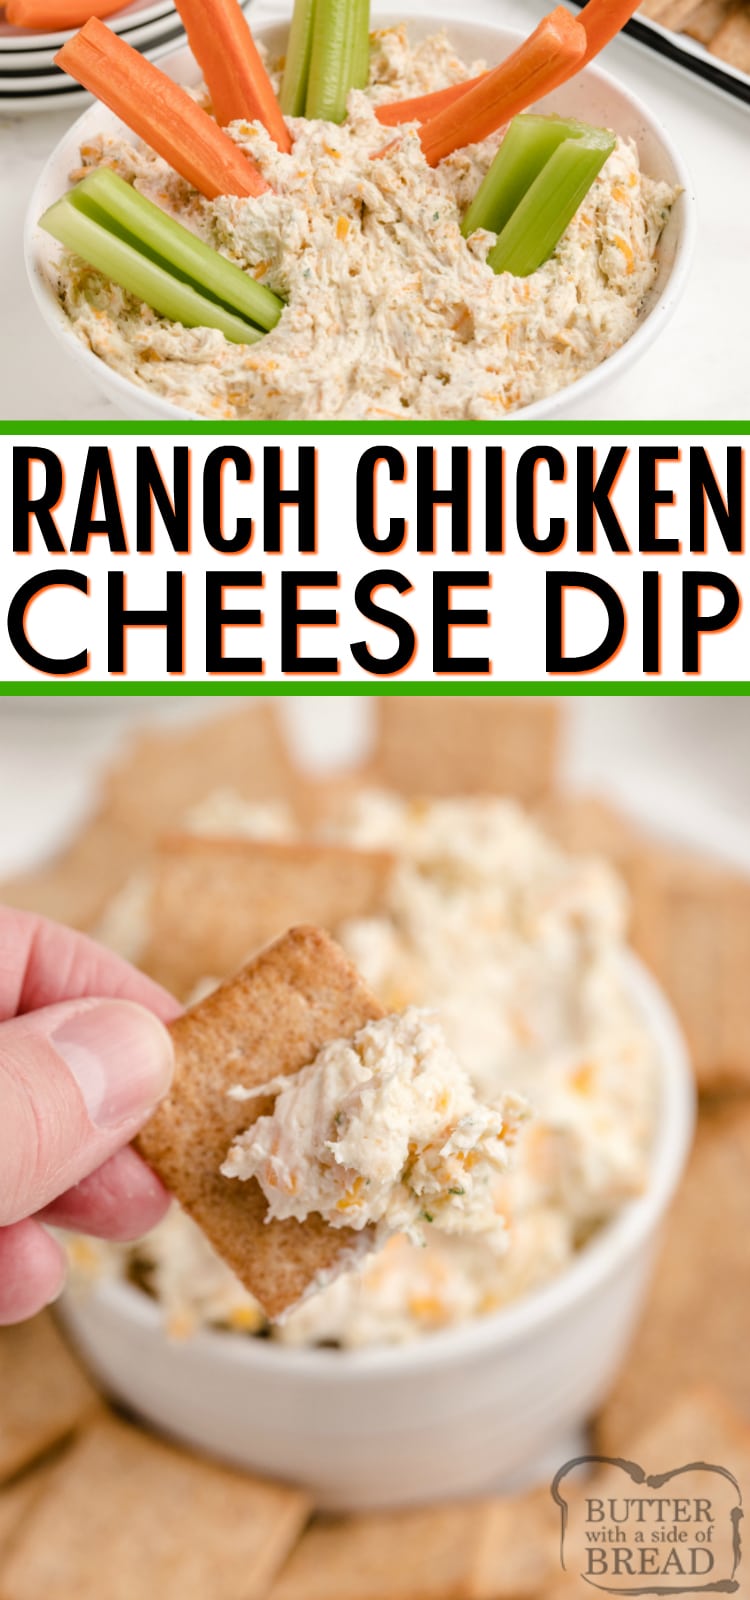 Ranch Chicken Cheese Dip is the perfect appetizer for parties! This cream cheese dip recipe is made with chicken, cream cheese, cheddar cheese and ranch dressing - that's it!